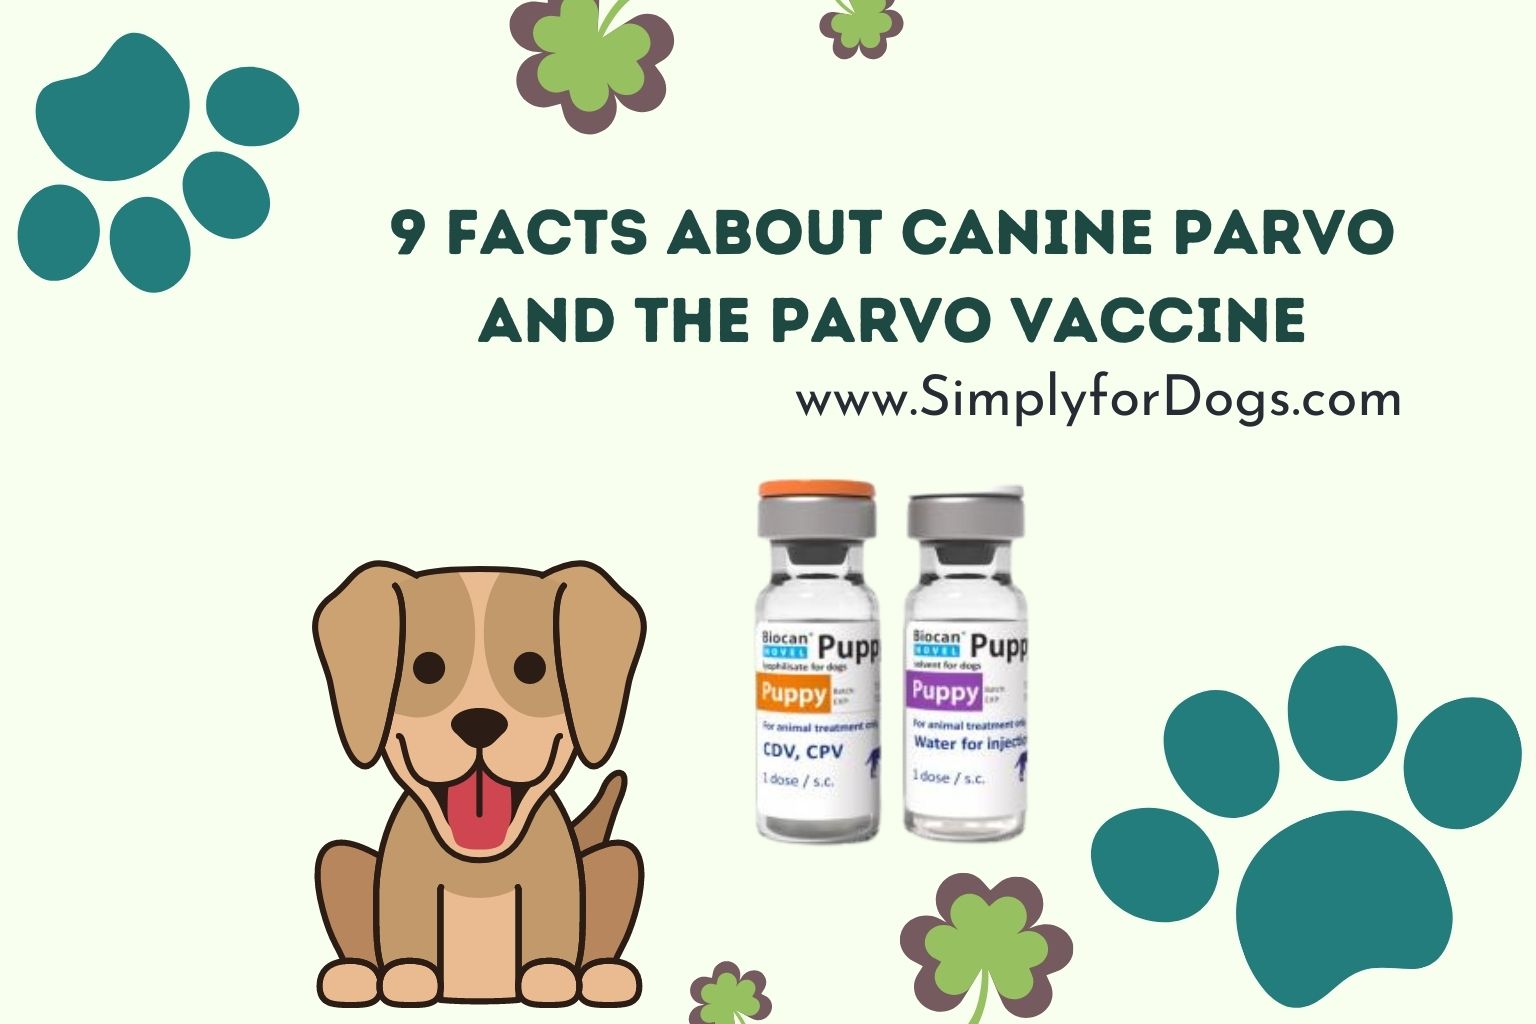 9 Facts About Canine Parvo and the Parvo Vaccine